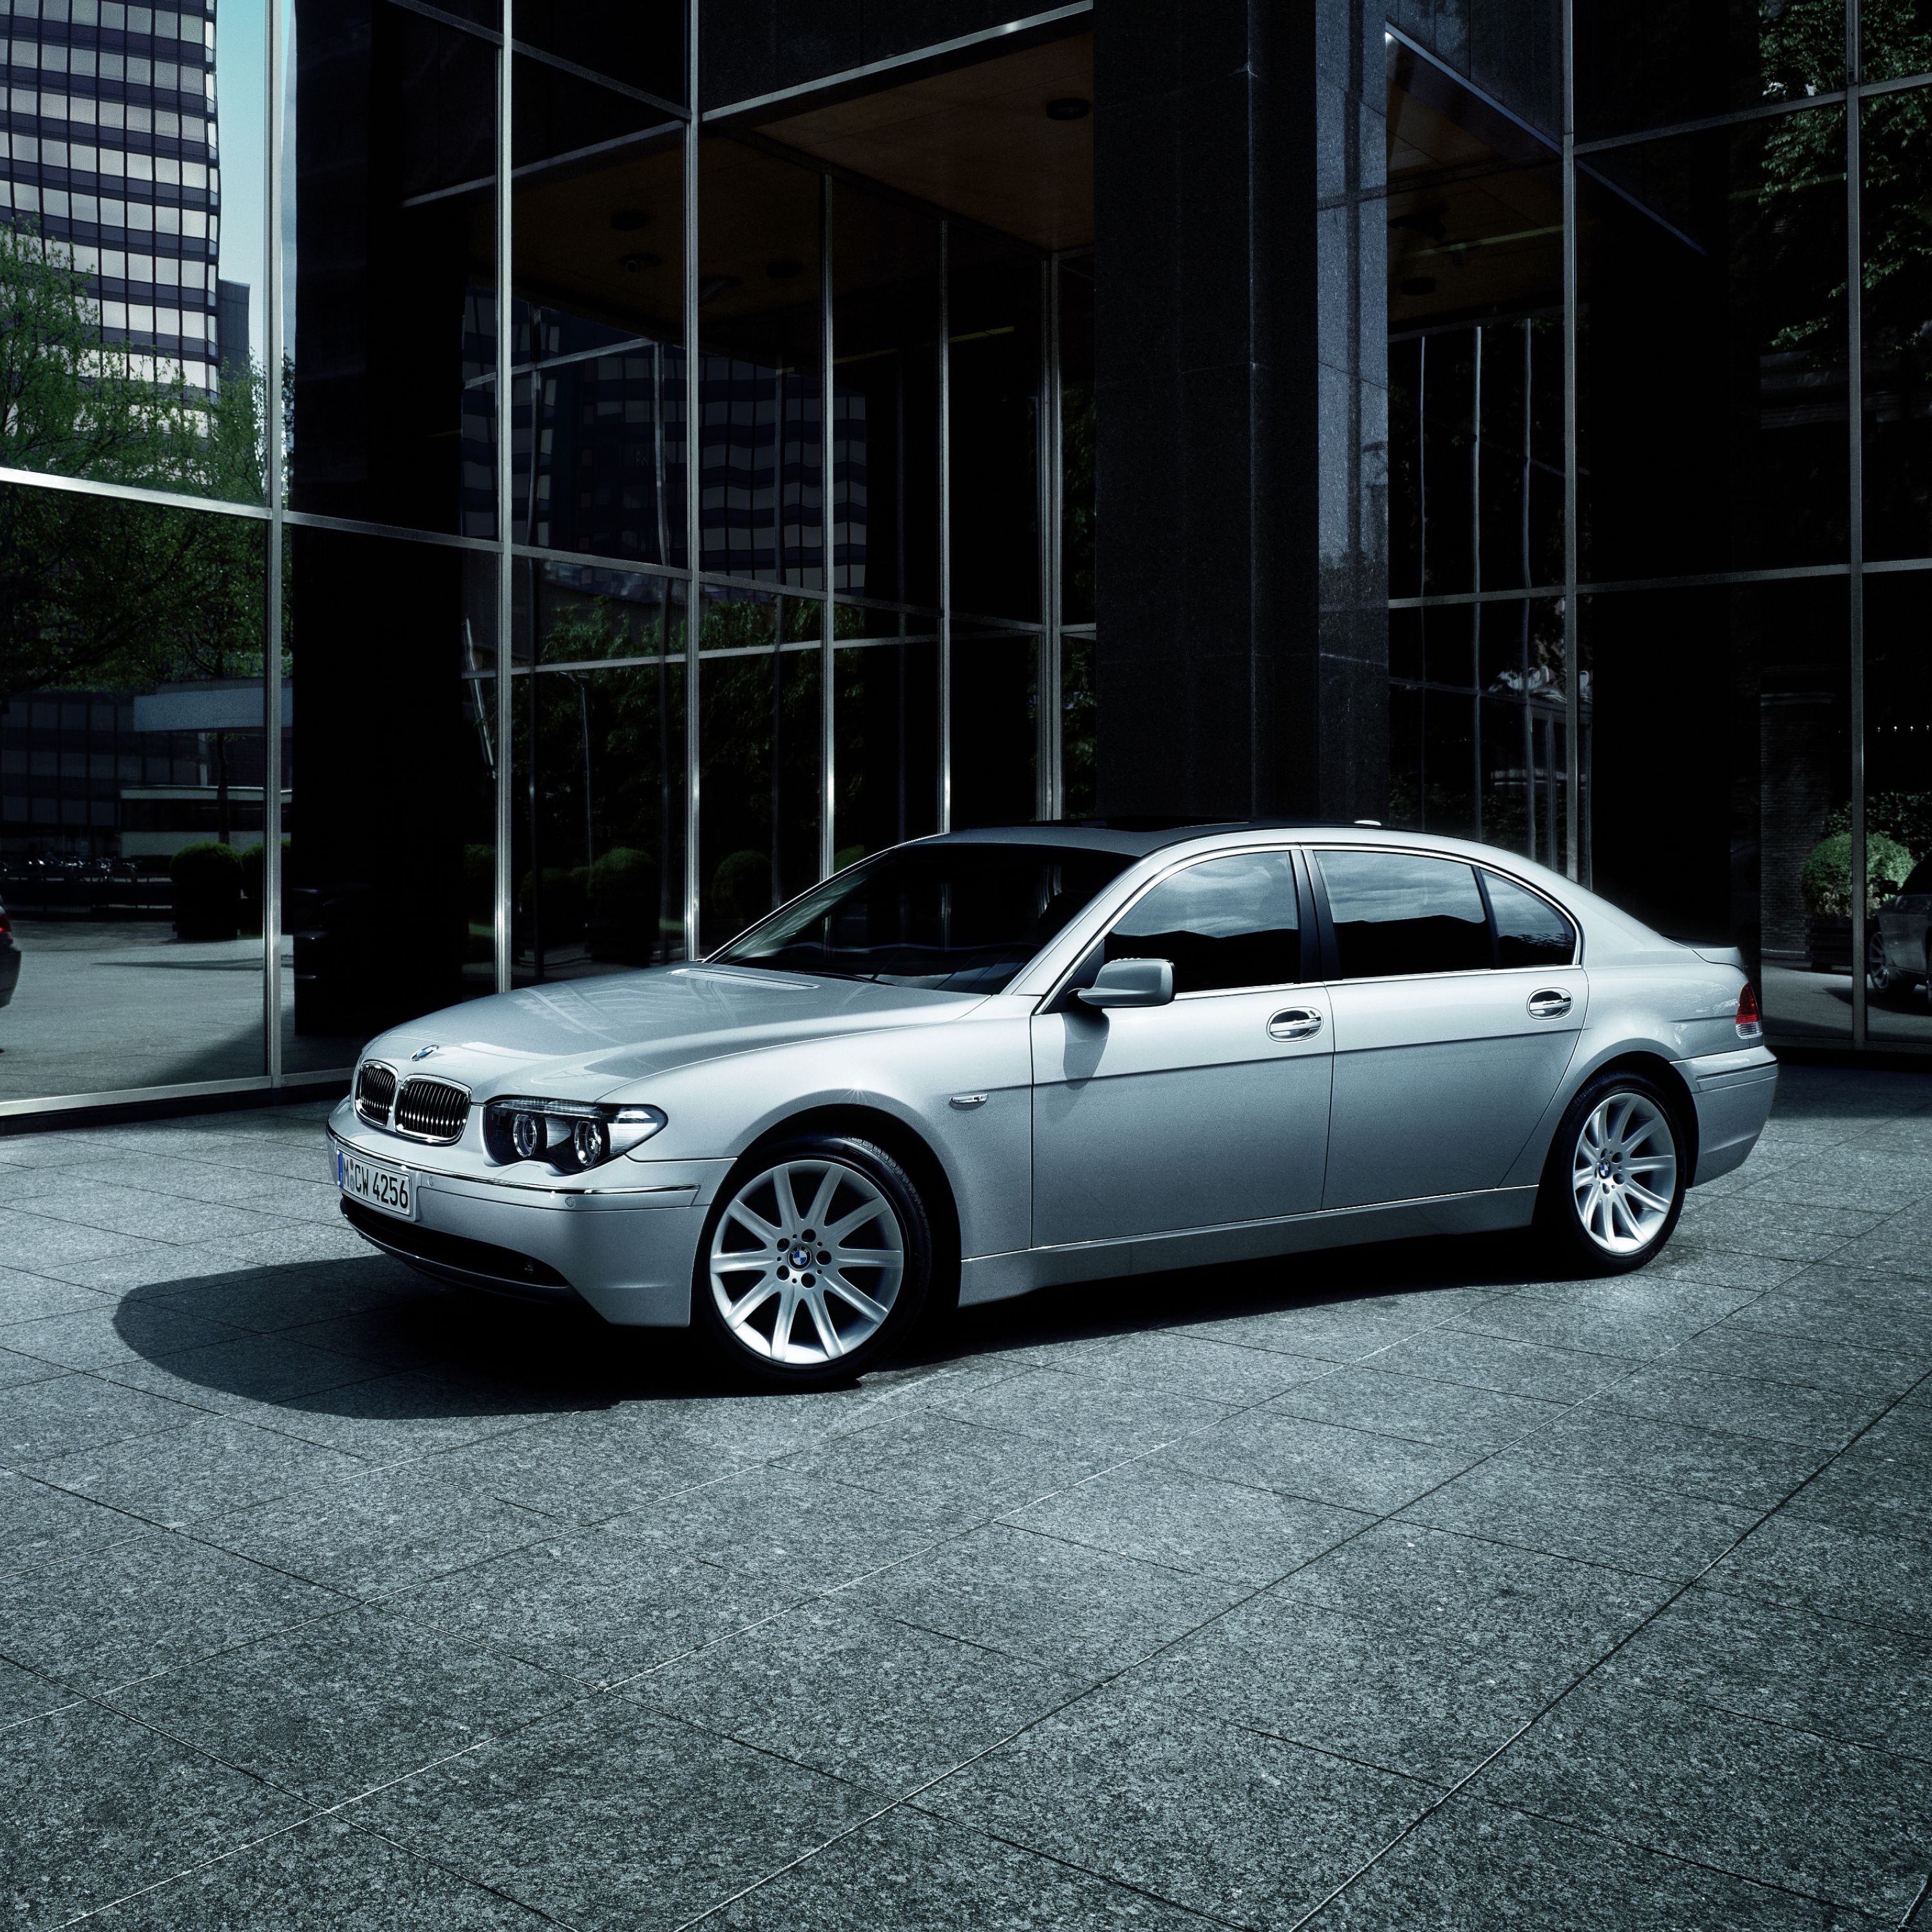 BMW 7 Series Sedan E65, E66, E67, E68 parked in front of a modern high-rise building with a black tinted glass front